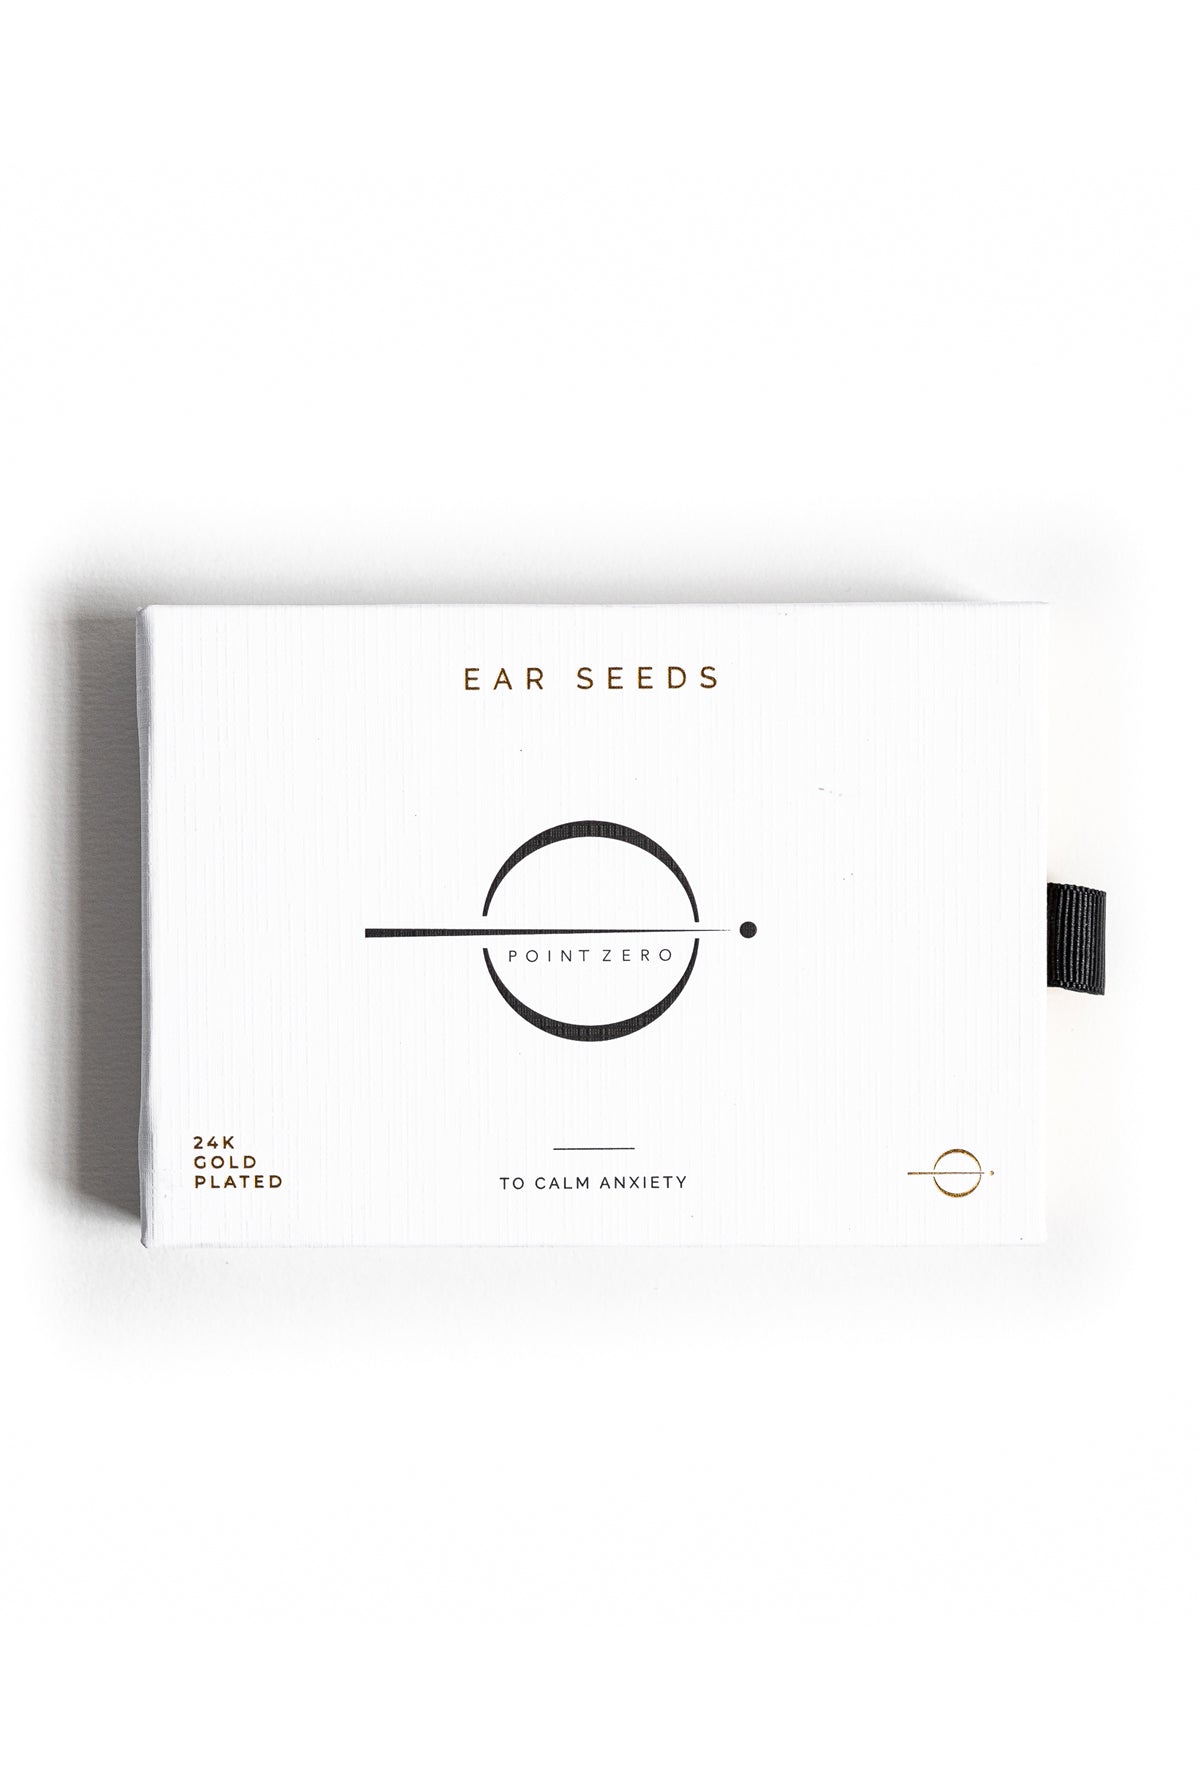 POINT ZERO Ear Seeds - Calm Anxiety - One Size Gold